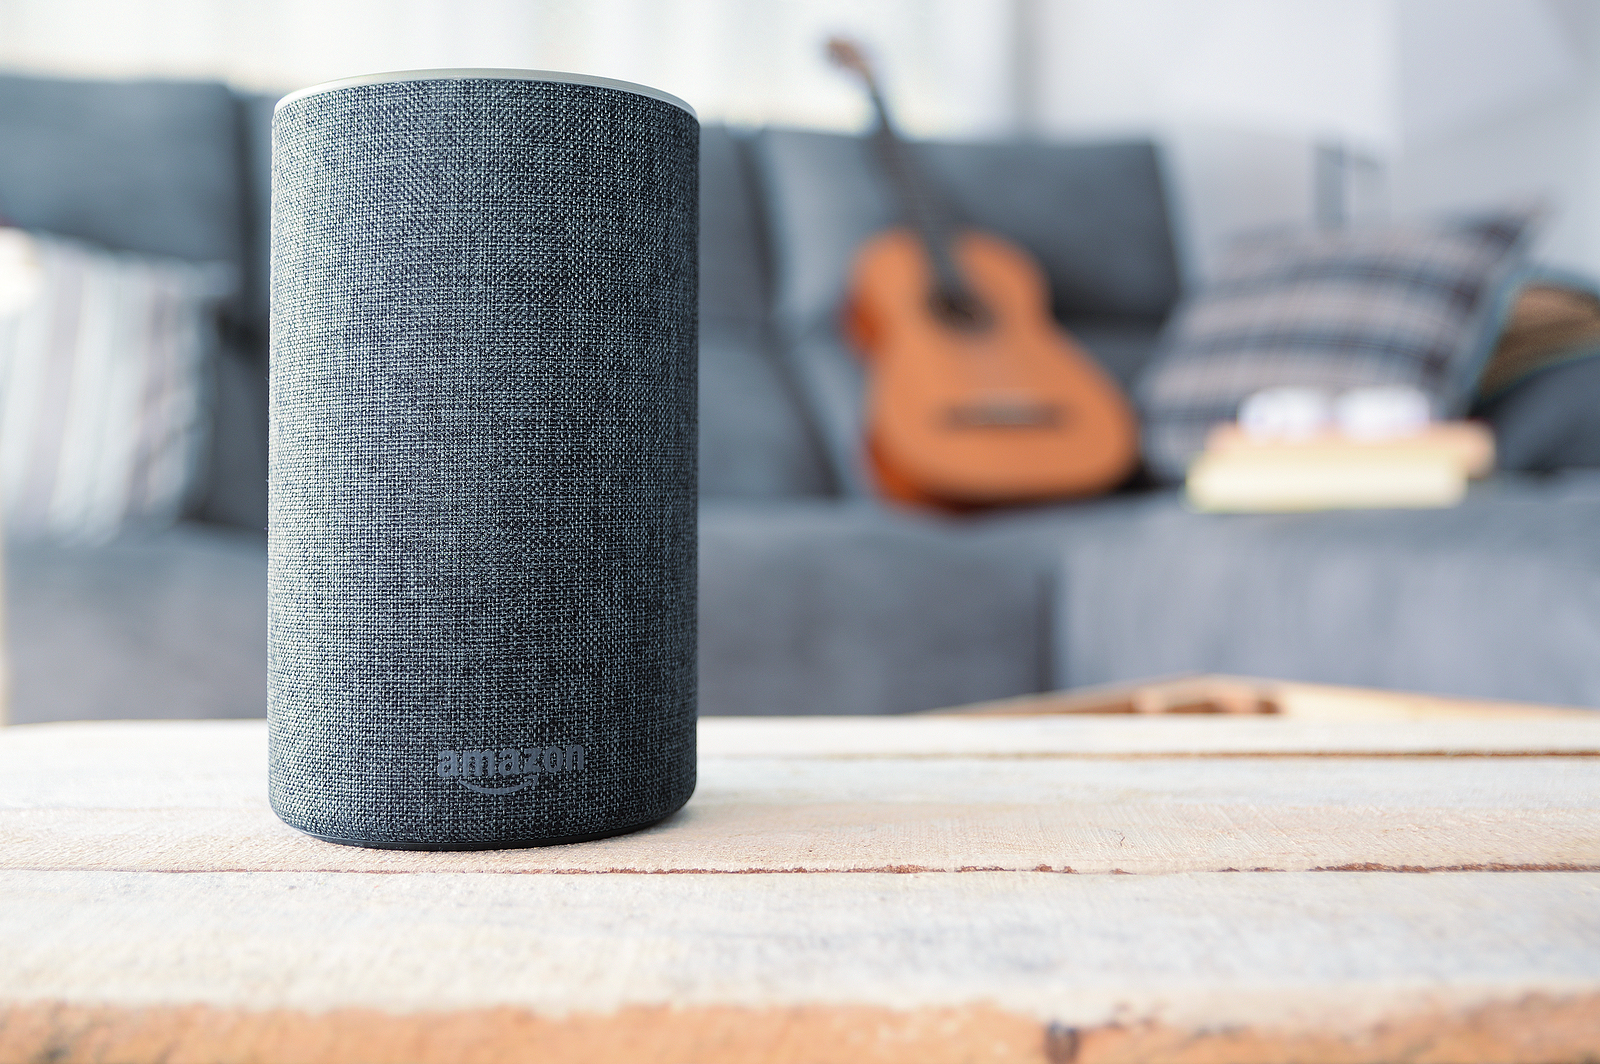 Federal Lawsuit Charges 's Alexa Violates Children's Privacy